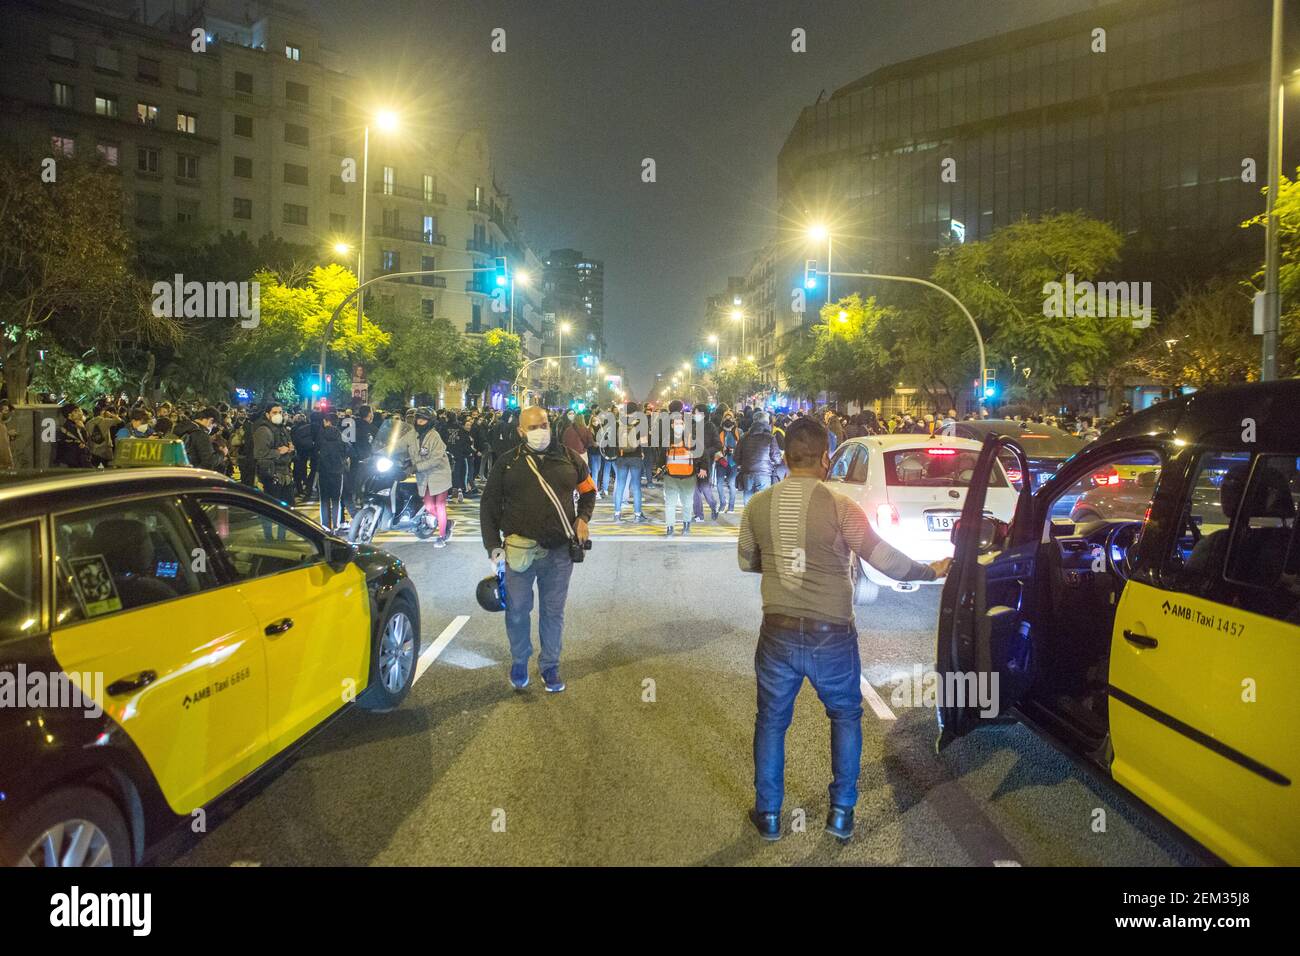 Barcelona Catalonia Spain 23rd Feb 21 Protesters Are Seen Counting Street Passing Cars Eighth Night Of Protests And Riots In Response To The Arrest And Imprisonment Of Rapper Pablo Hasel Accused Of Exalting